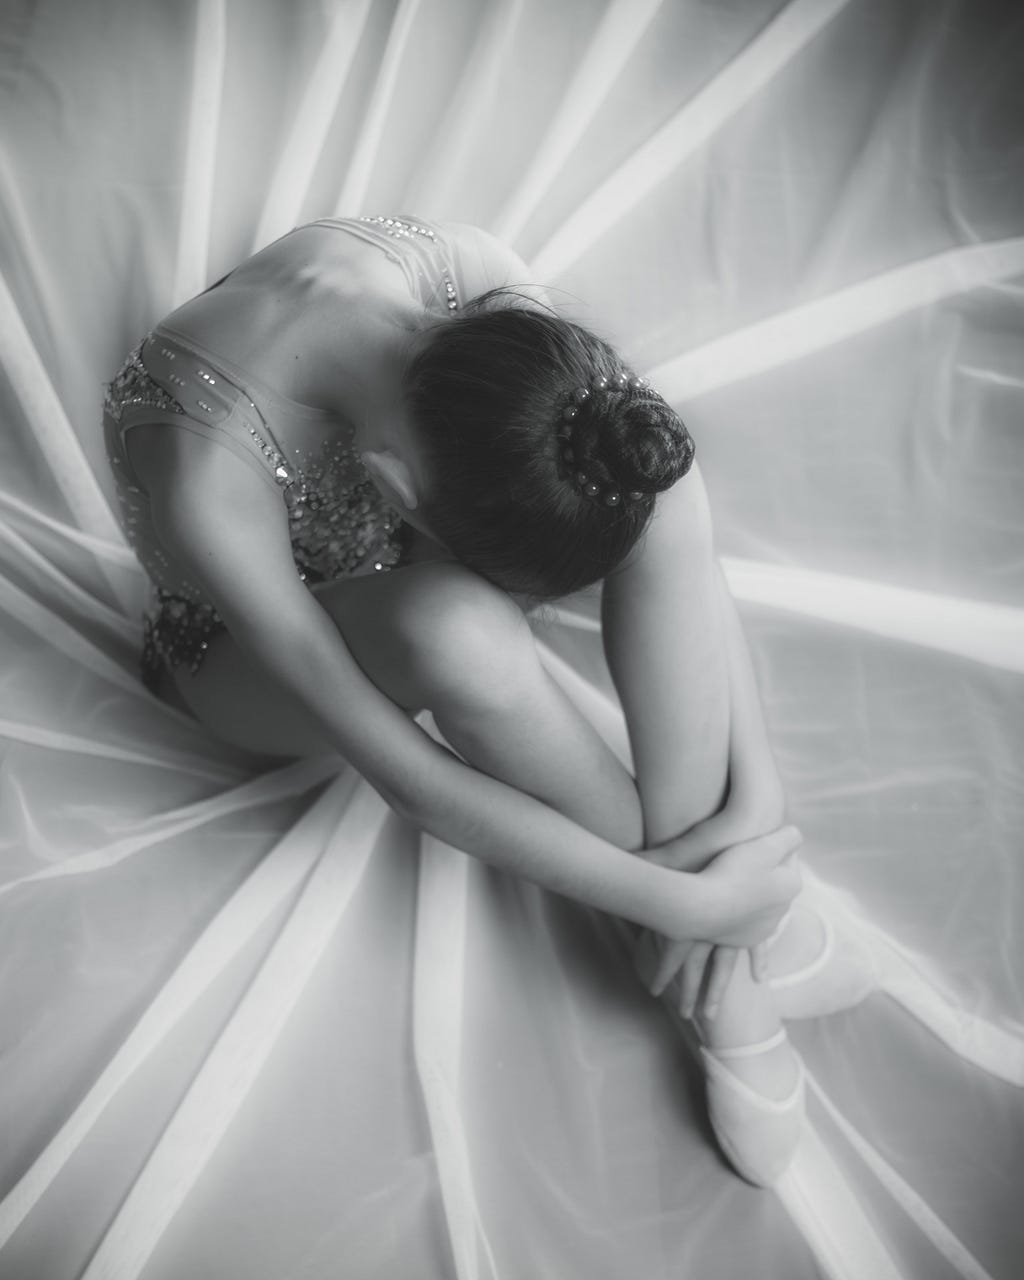 Black and white photo of a sad ballerina, curled up in a ball